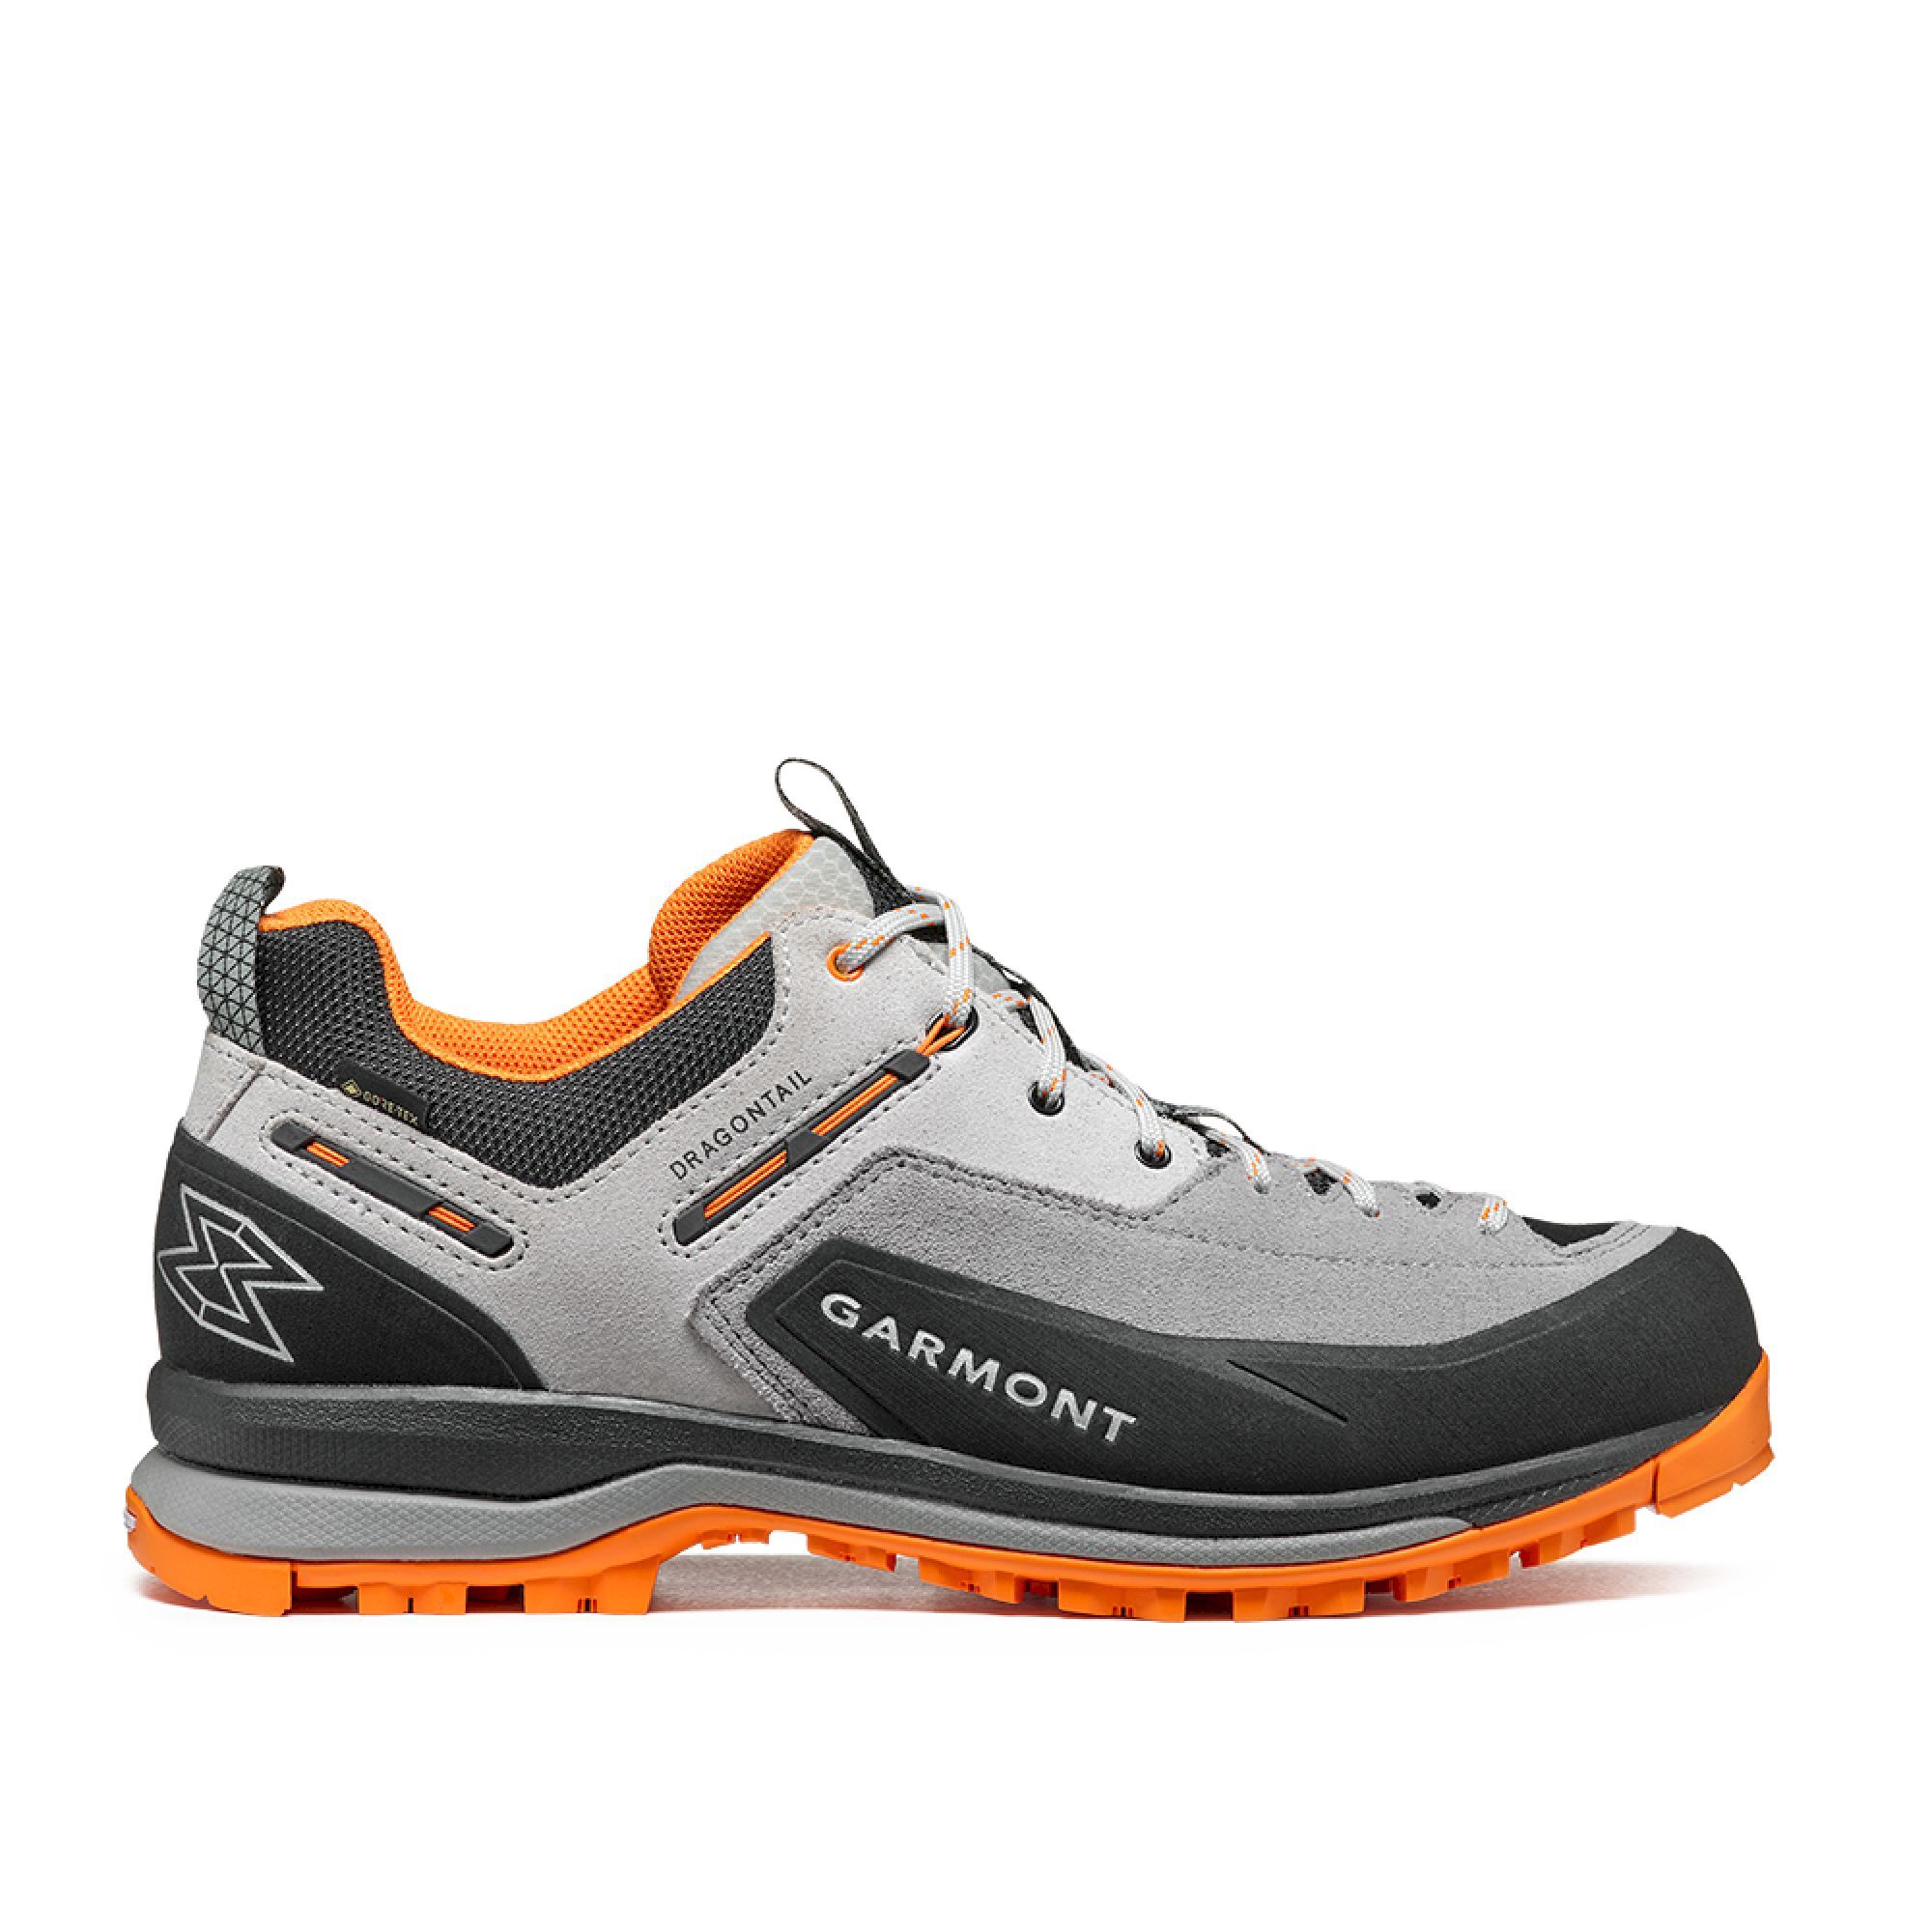 Garmont Dragontail Tech GTX - Limited Edition - Approachschuhe | Hardloop